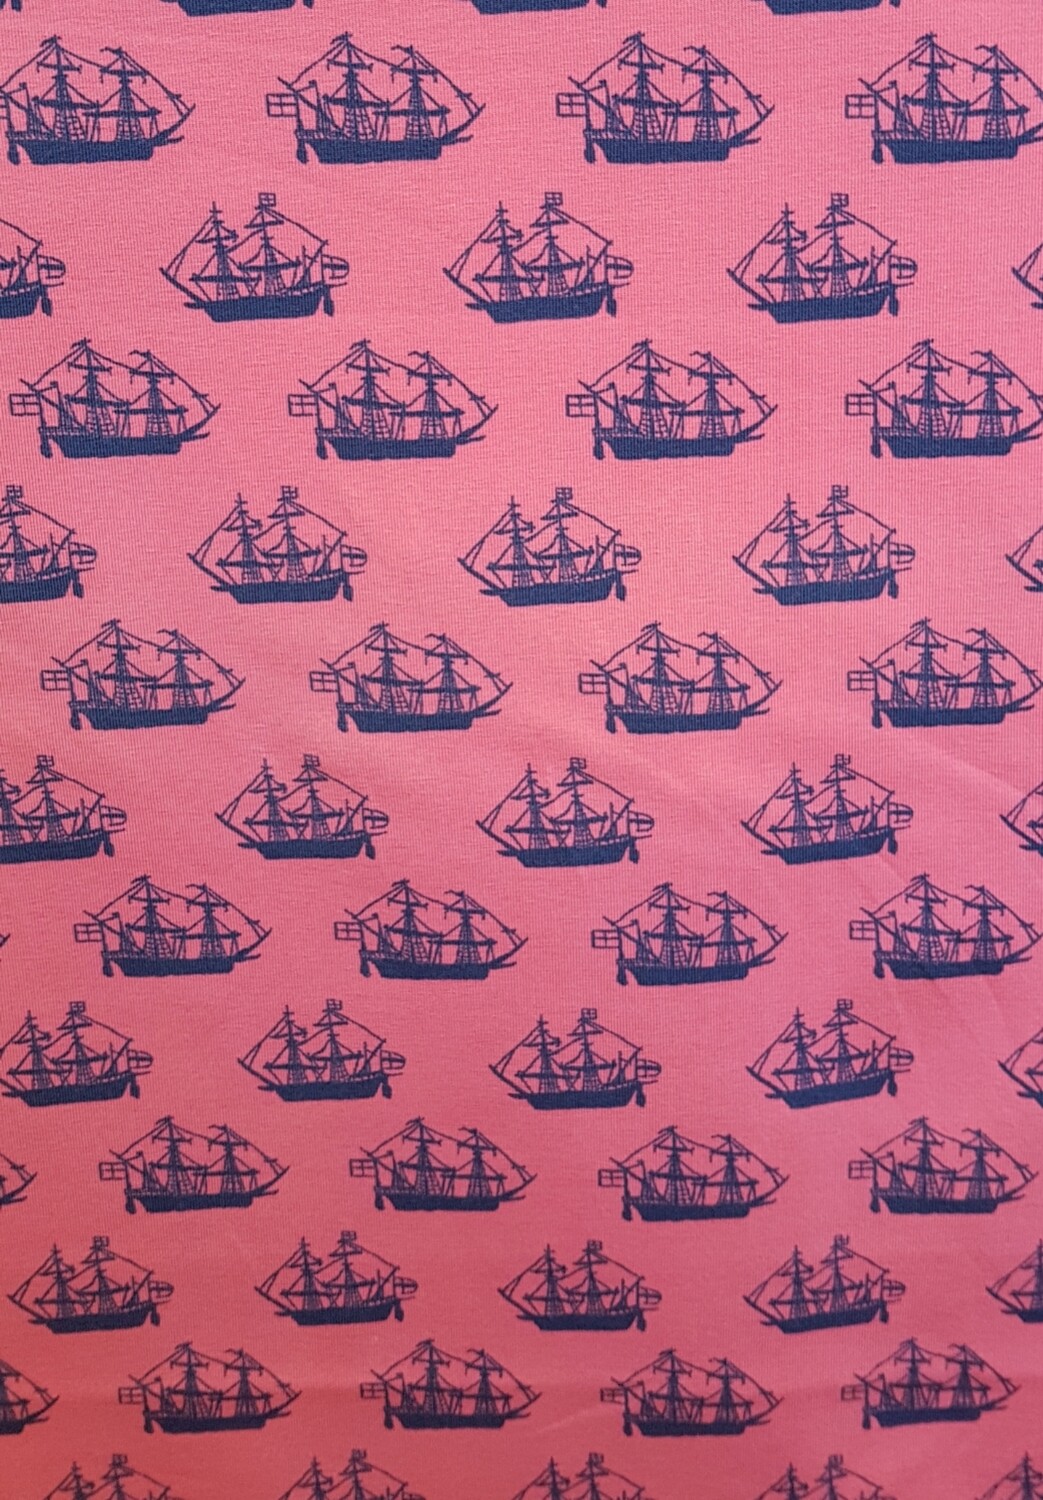 Cotton Jersey Nautical Tall Ships Print Blue ships on Red background